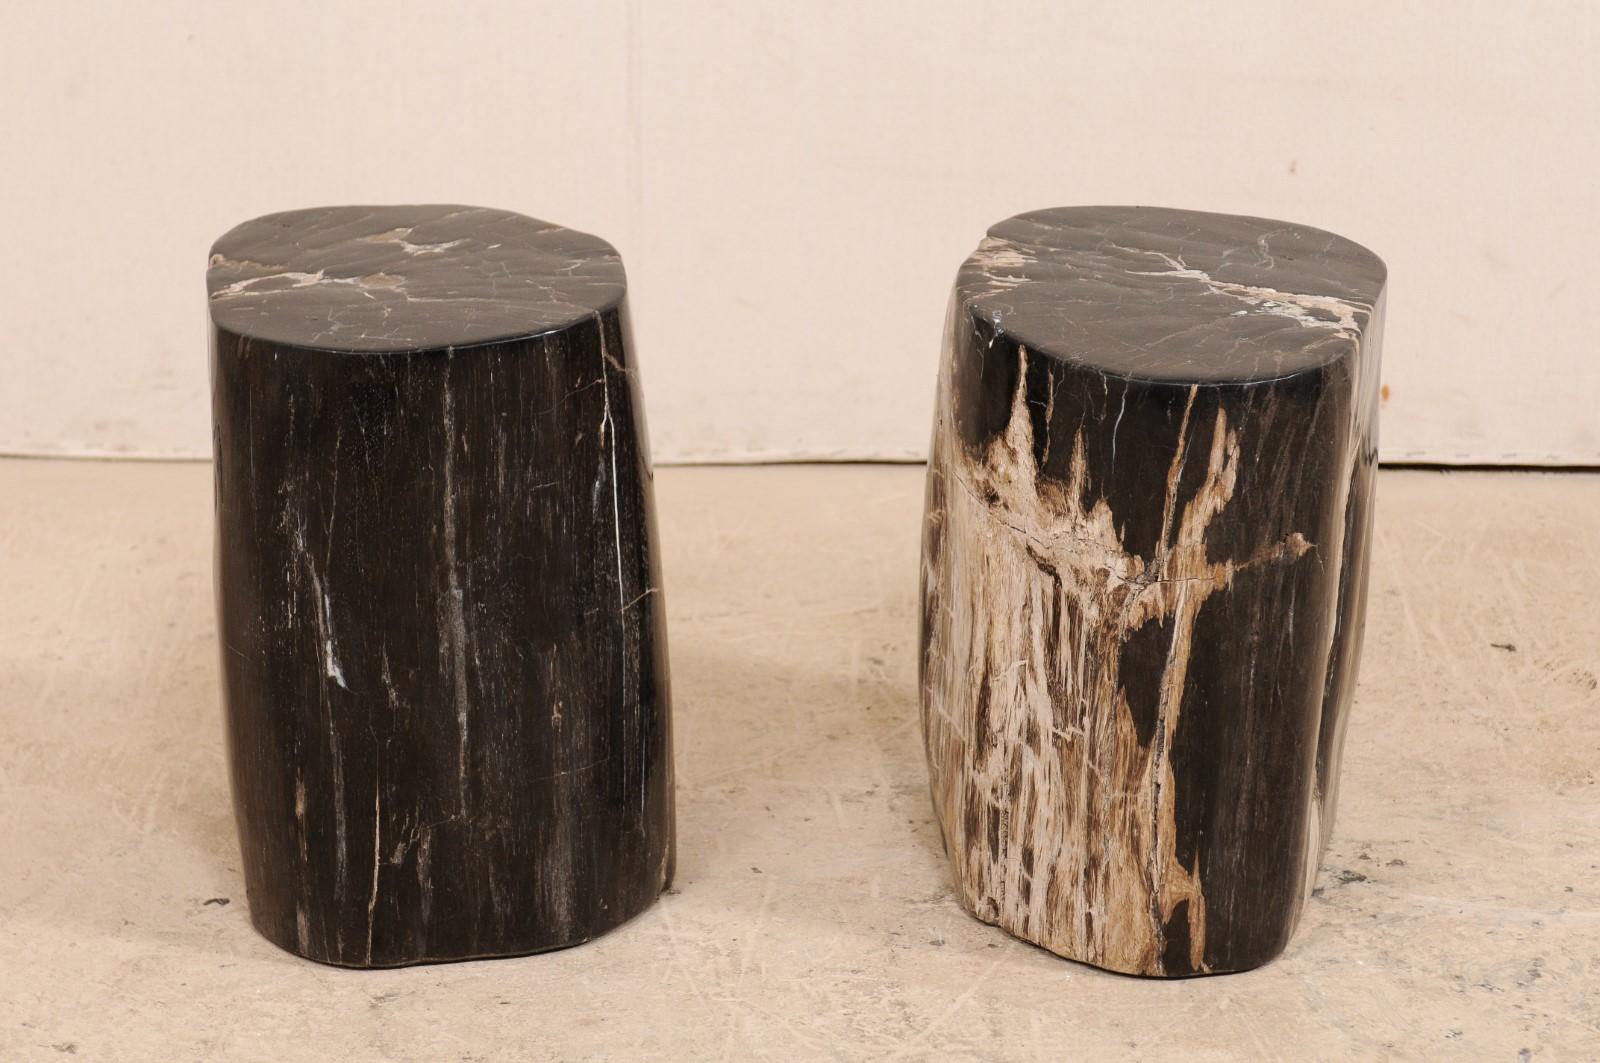 A pair of mostly black colored petrified wood drinks tables (or stools). This pair of petrified wood drinks tables features a polished finish. Petrified wood is a fossil. Over time, the petrified wood becomes so sturdy and dense that it is as heavy